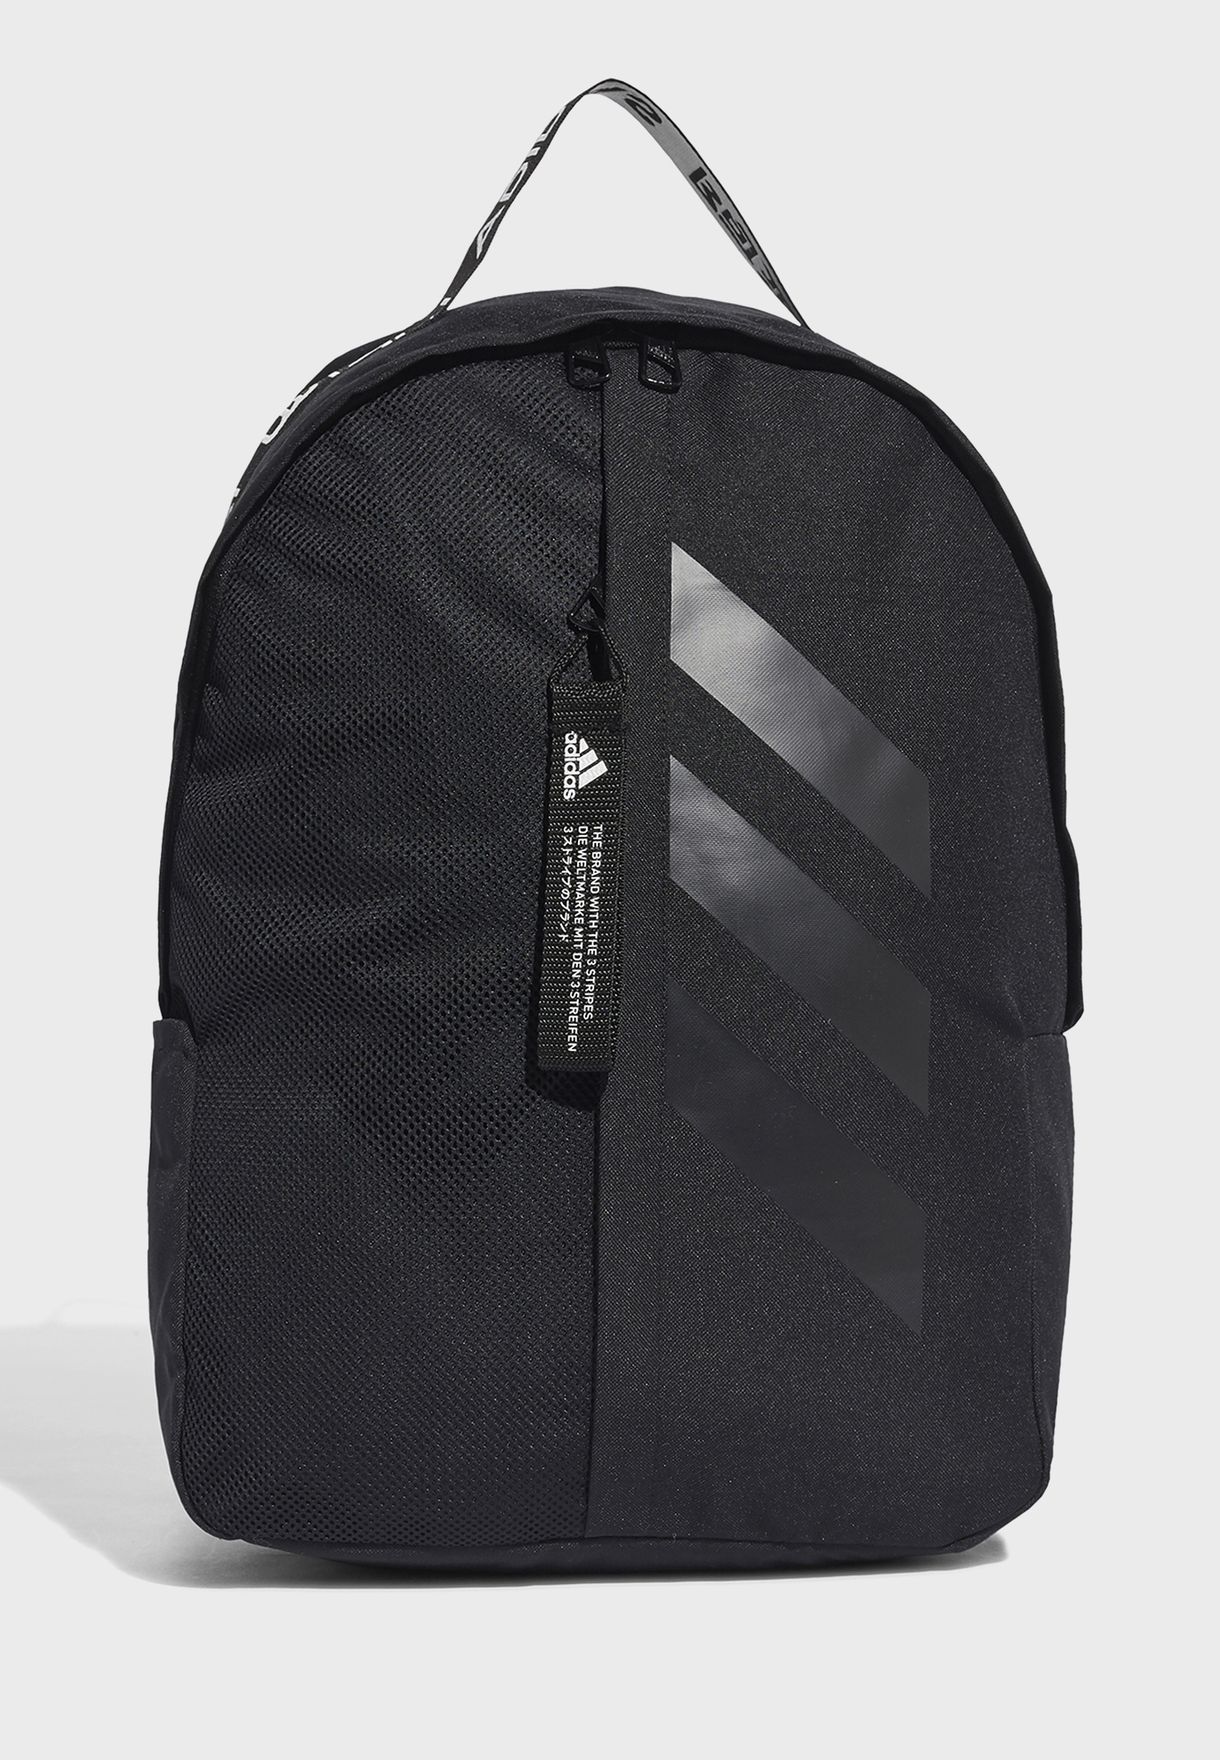 adidas the brand with the 3 stripes bag